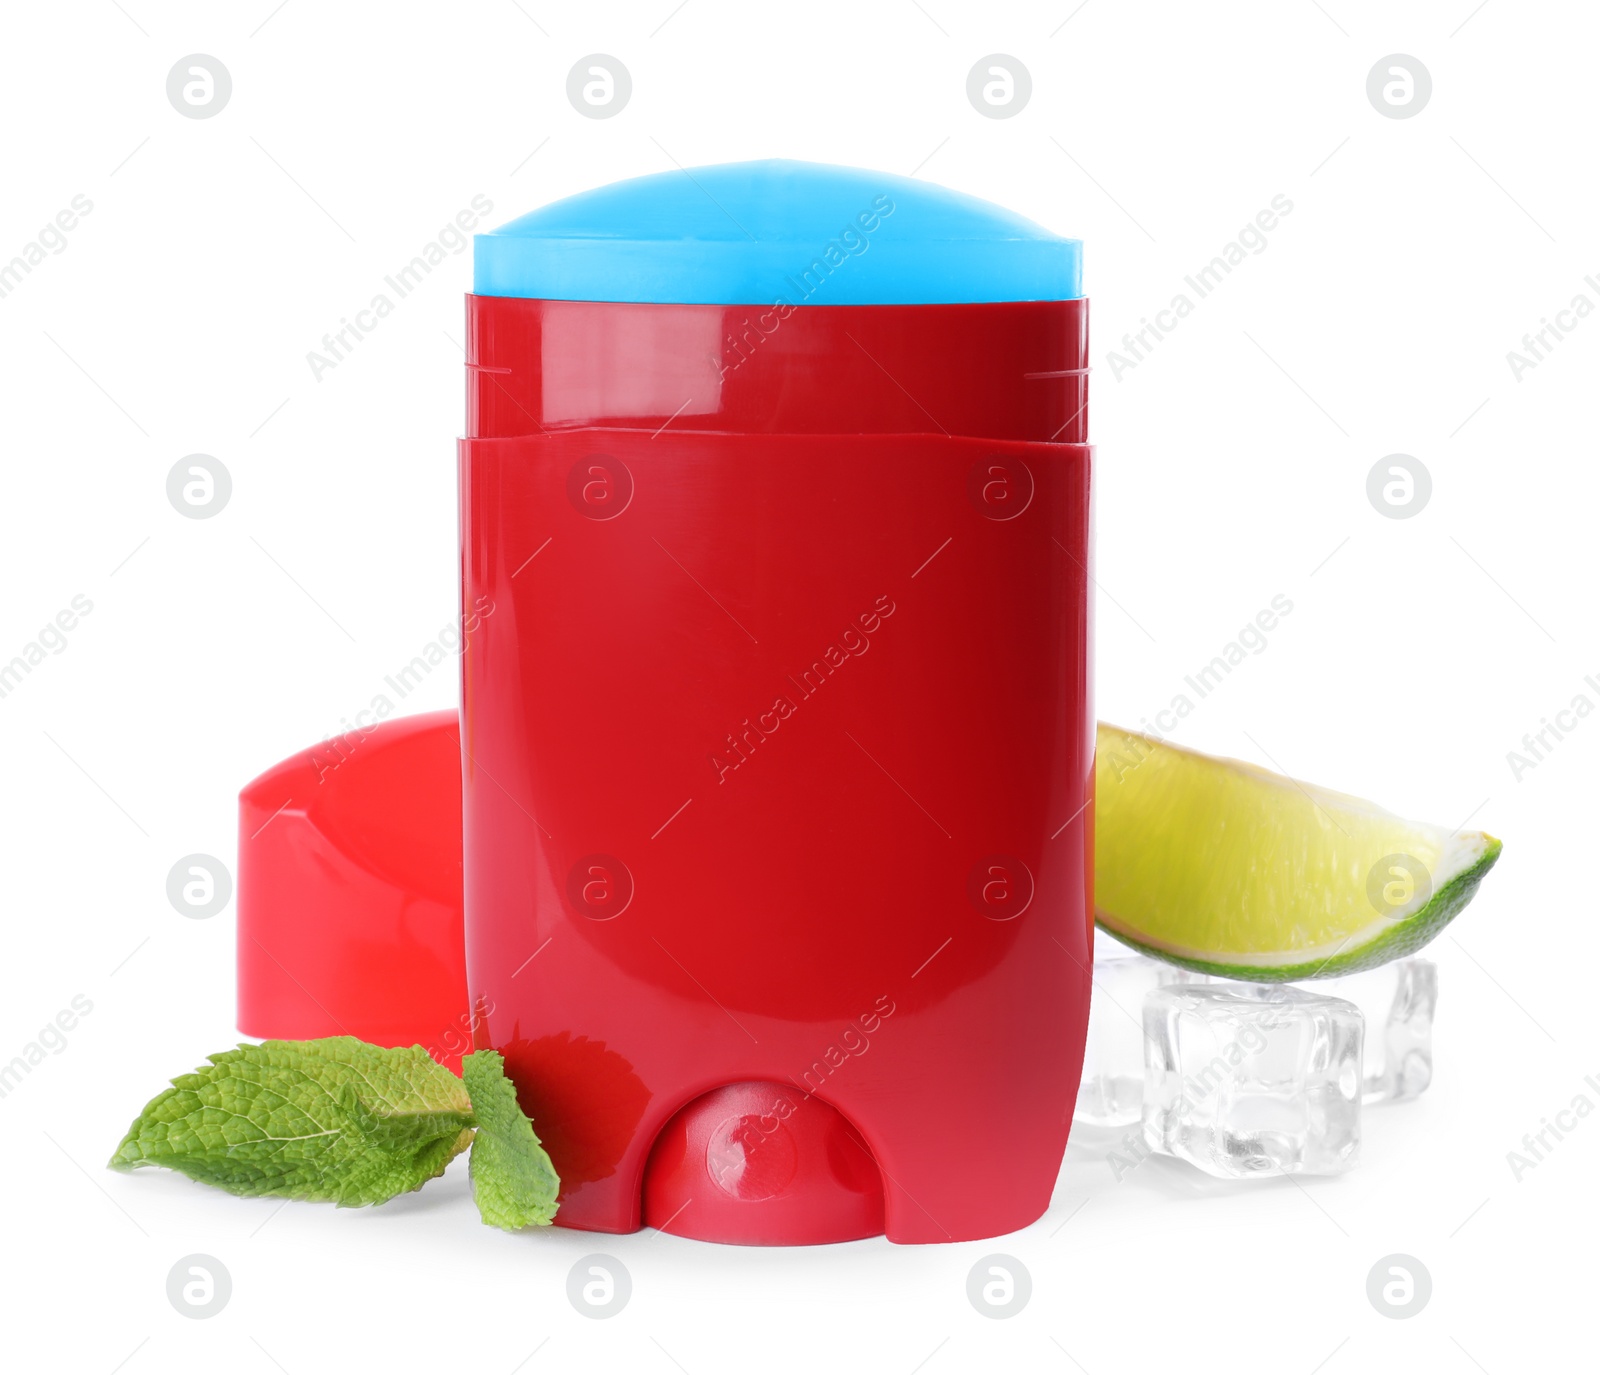 Photo of Natural male deodorant with ice and mint on white background